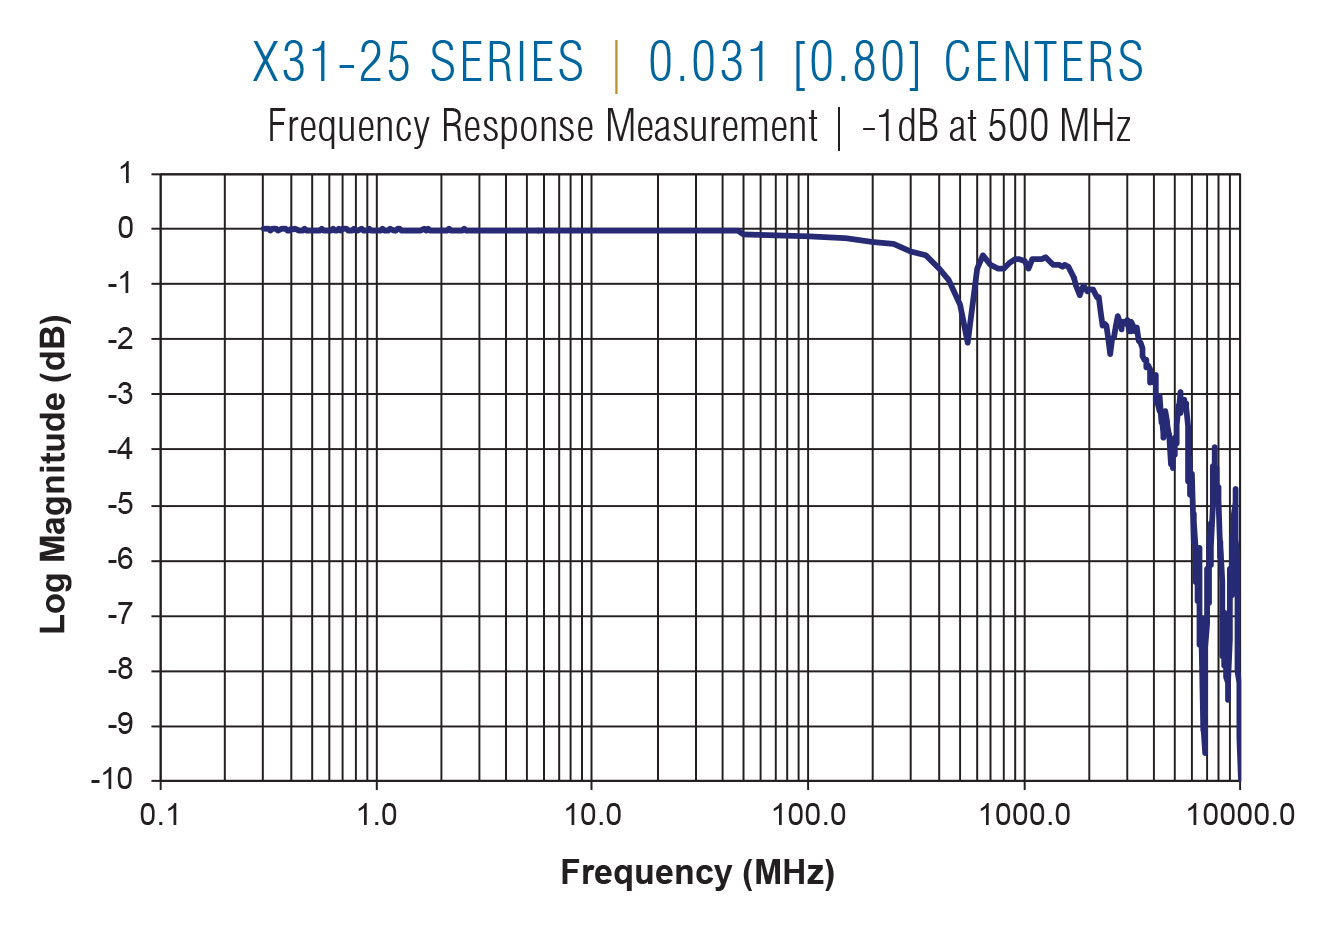 X31-25 Frequency on 0.031 centers